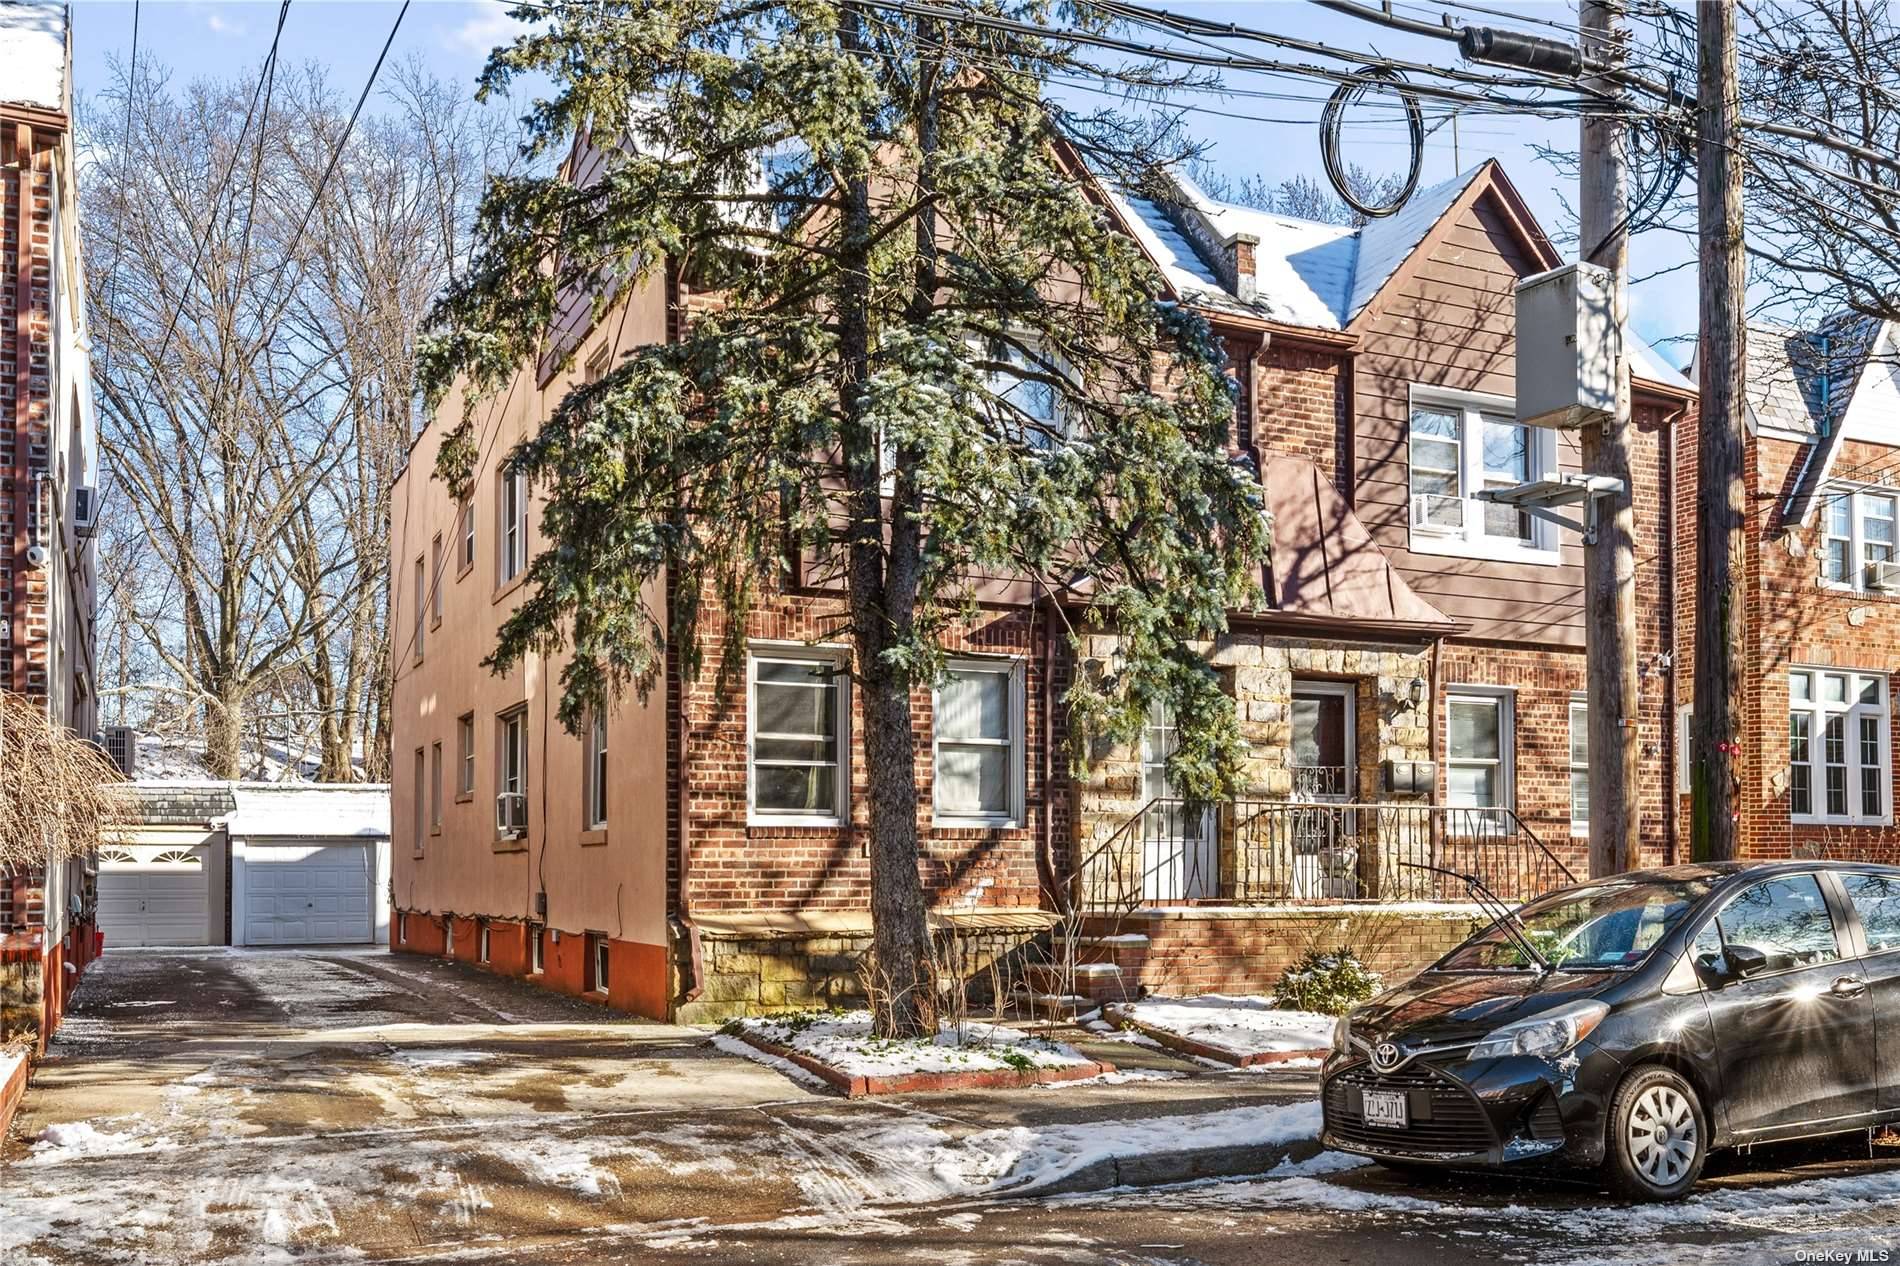 The Imperium Team presents a legal two family, semi detached, brick townhouse on the Rego Park Forest Hills border, featuring 4 bedrooms, 3 full bathrooms, a 2 car detached garage ...